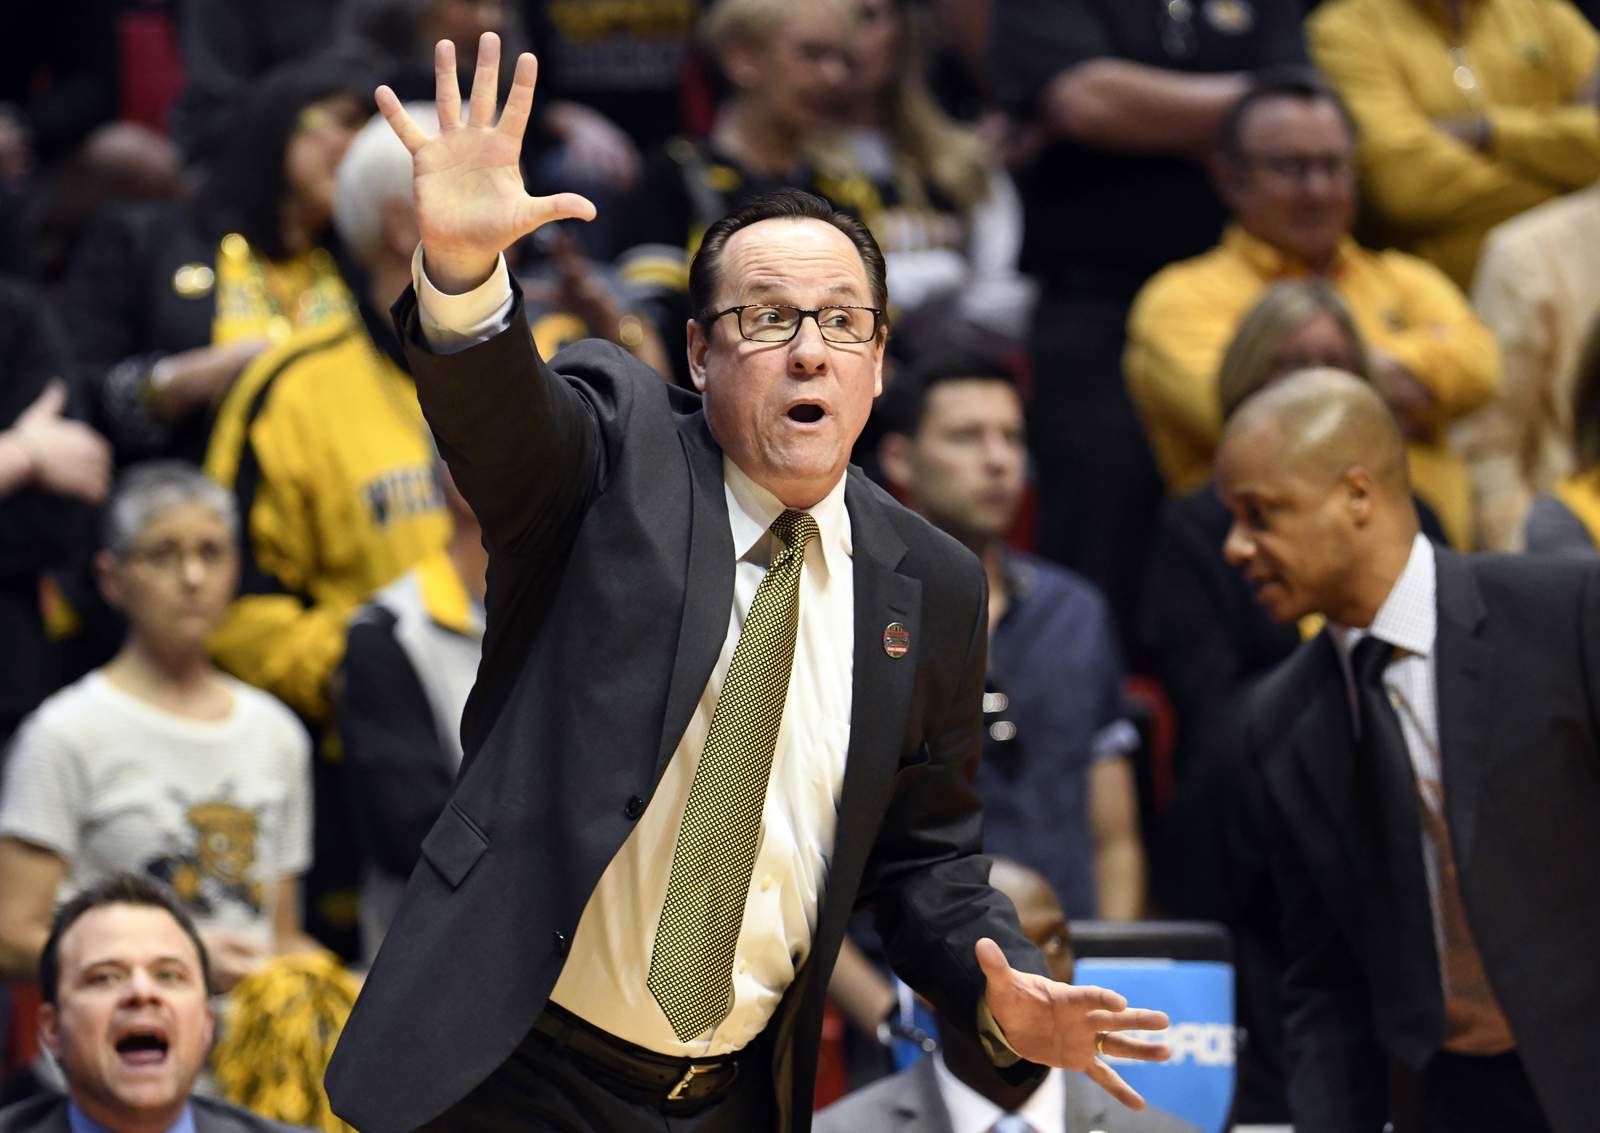 Wichita State coach Marshall resigns after misconduct probe